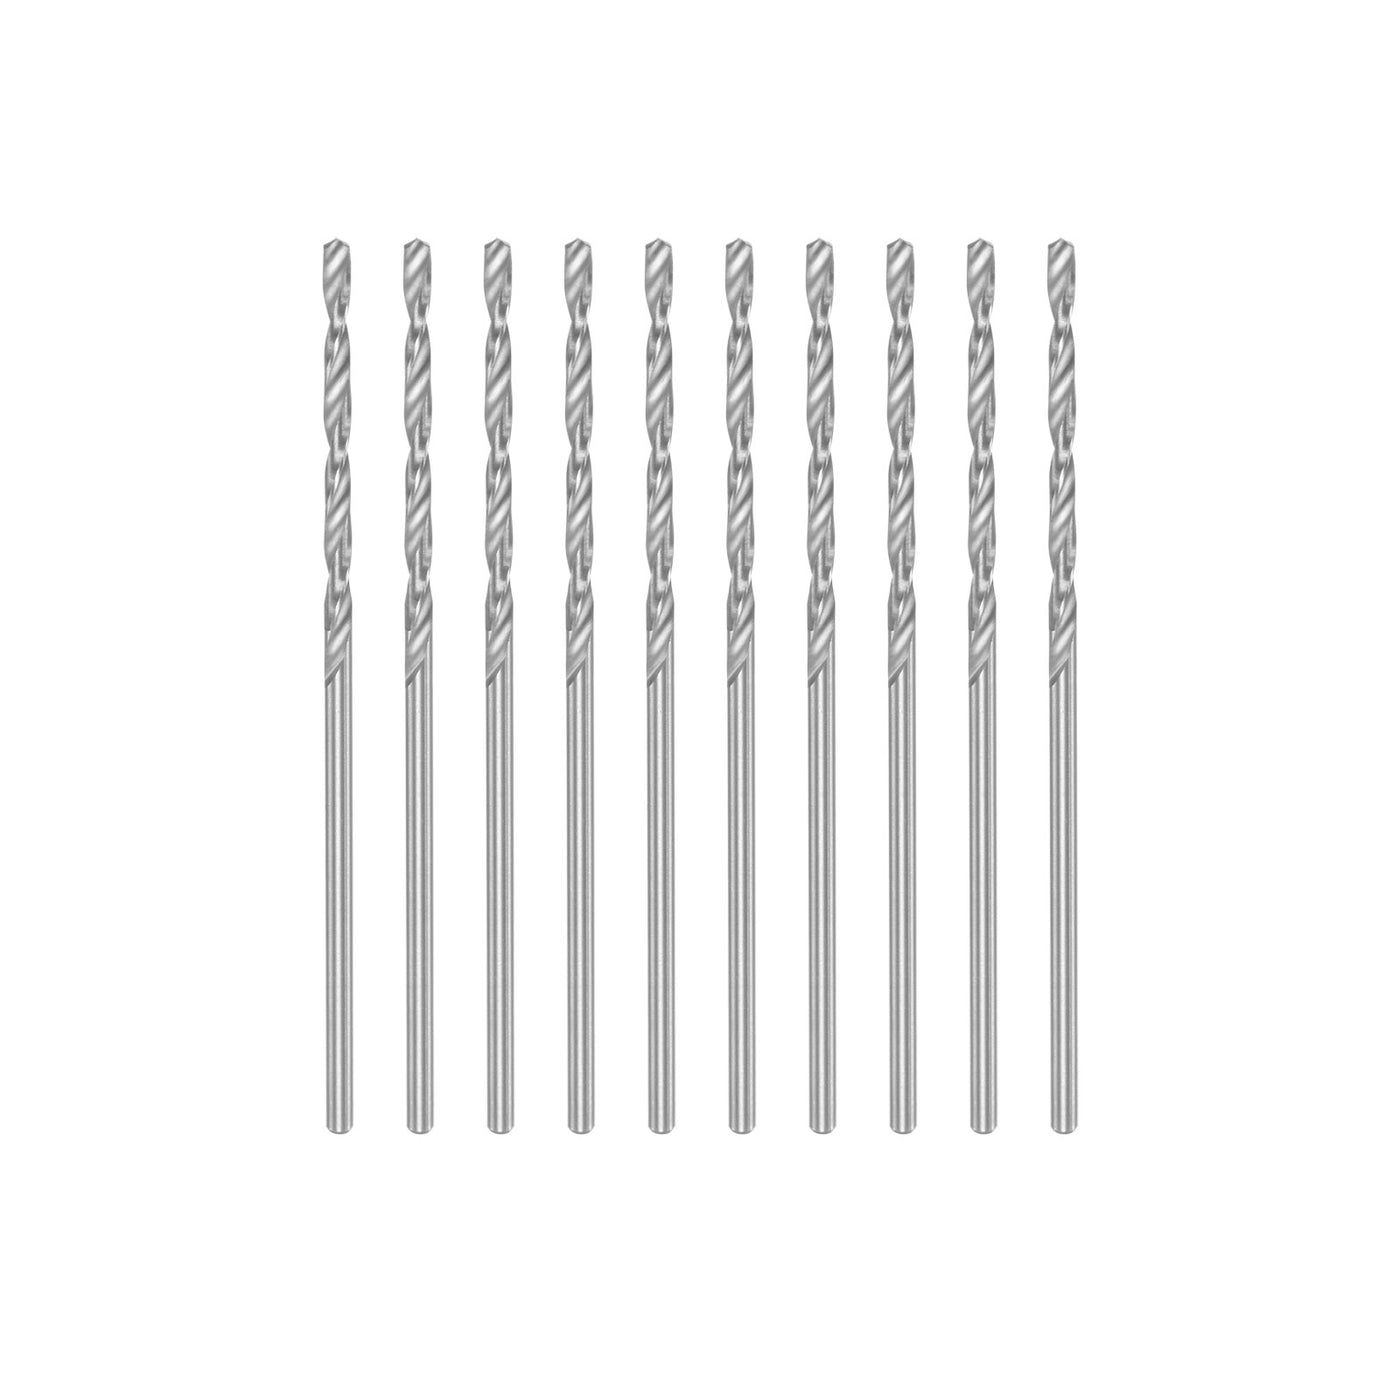 uxcell Uxcell 10 Pcs 1.6mm High Speed Steel Drill Bits, Fully Ground 50mm Length Drill Bit